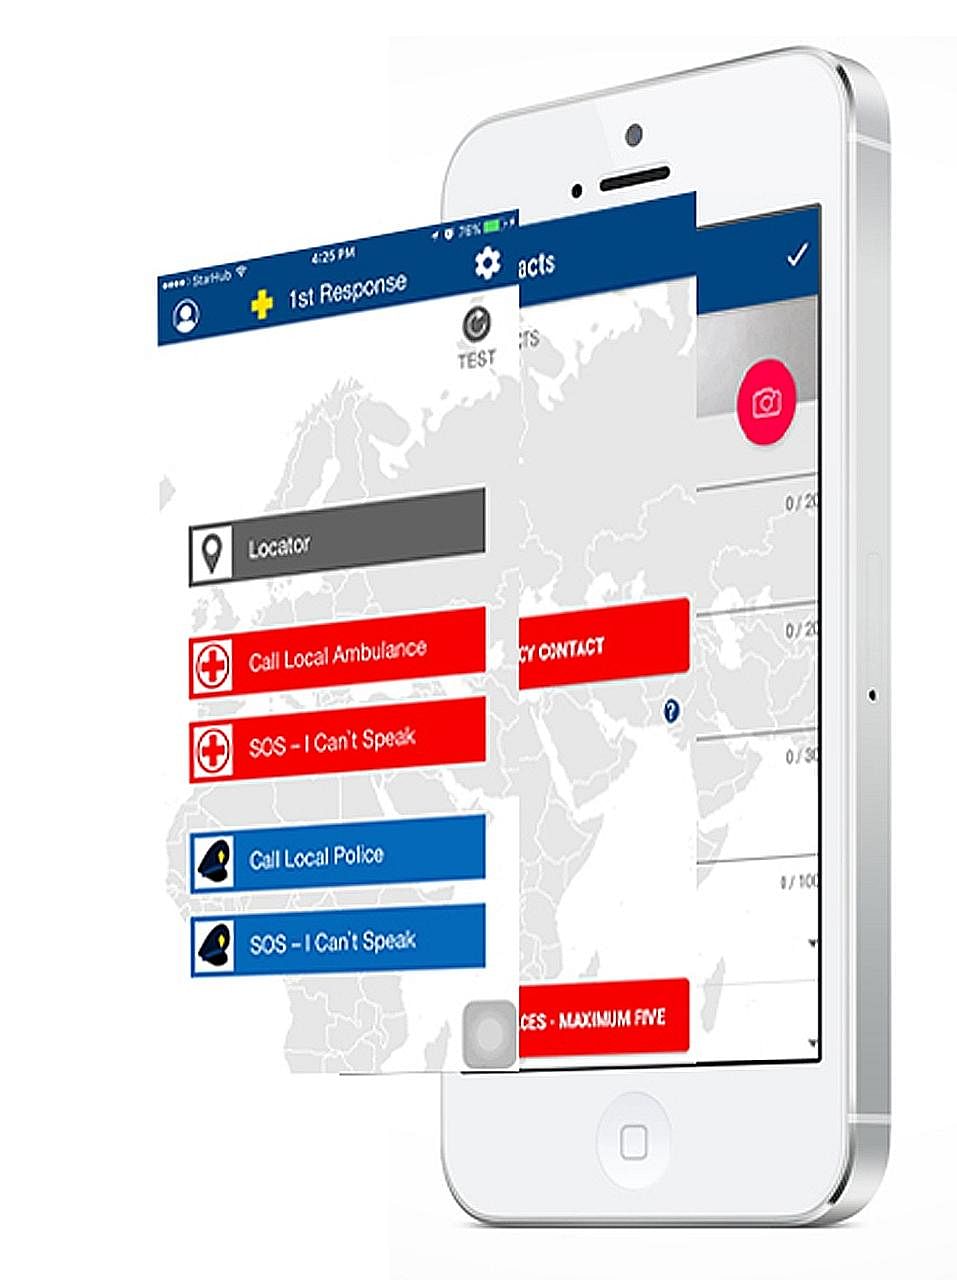 The 1st Response app helps people quickly contact emergency services wherever they are in the world.